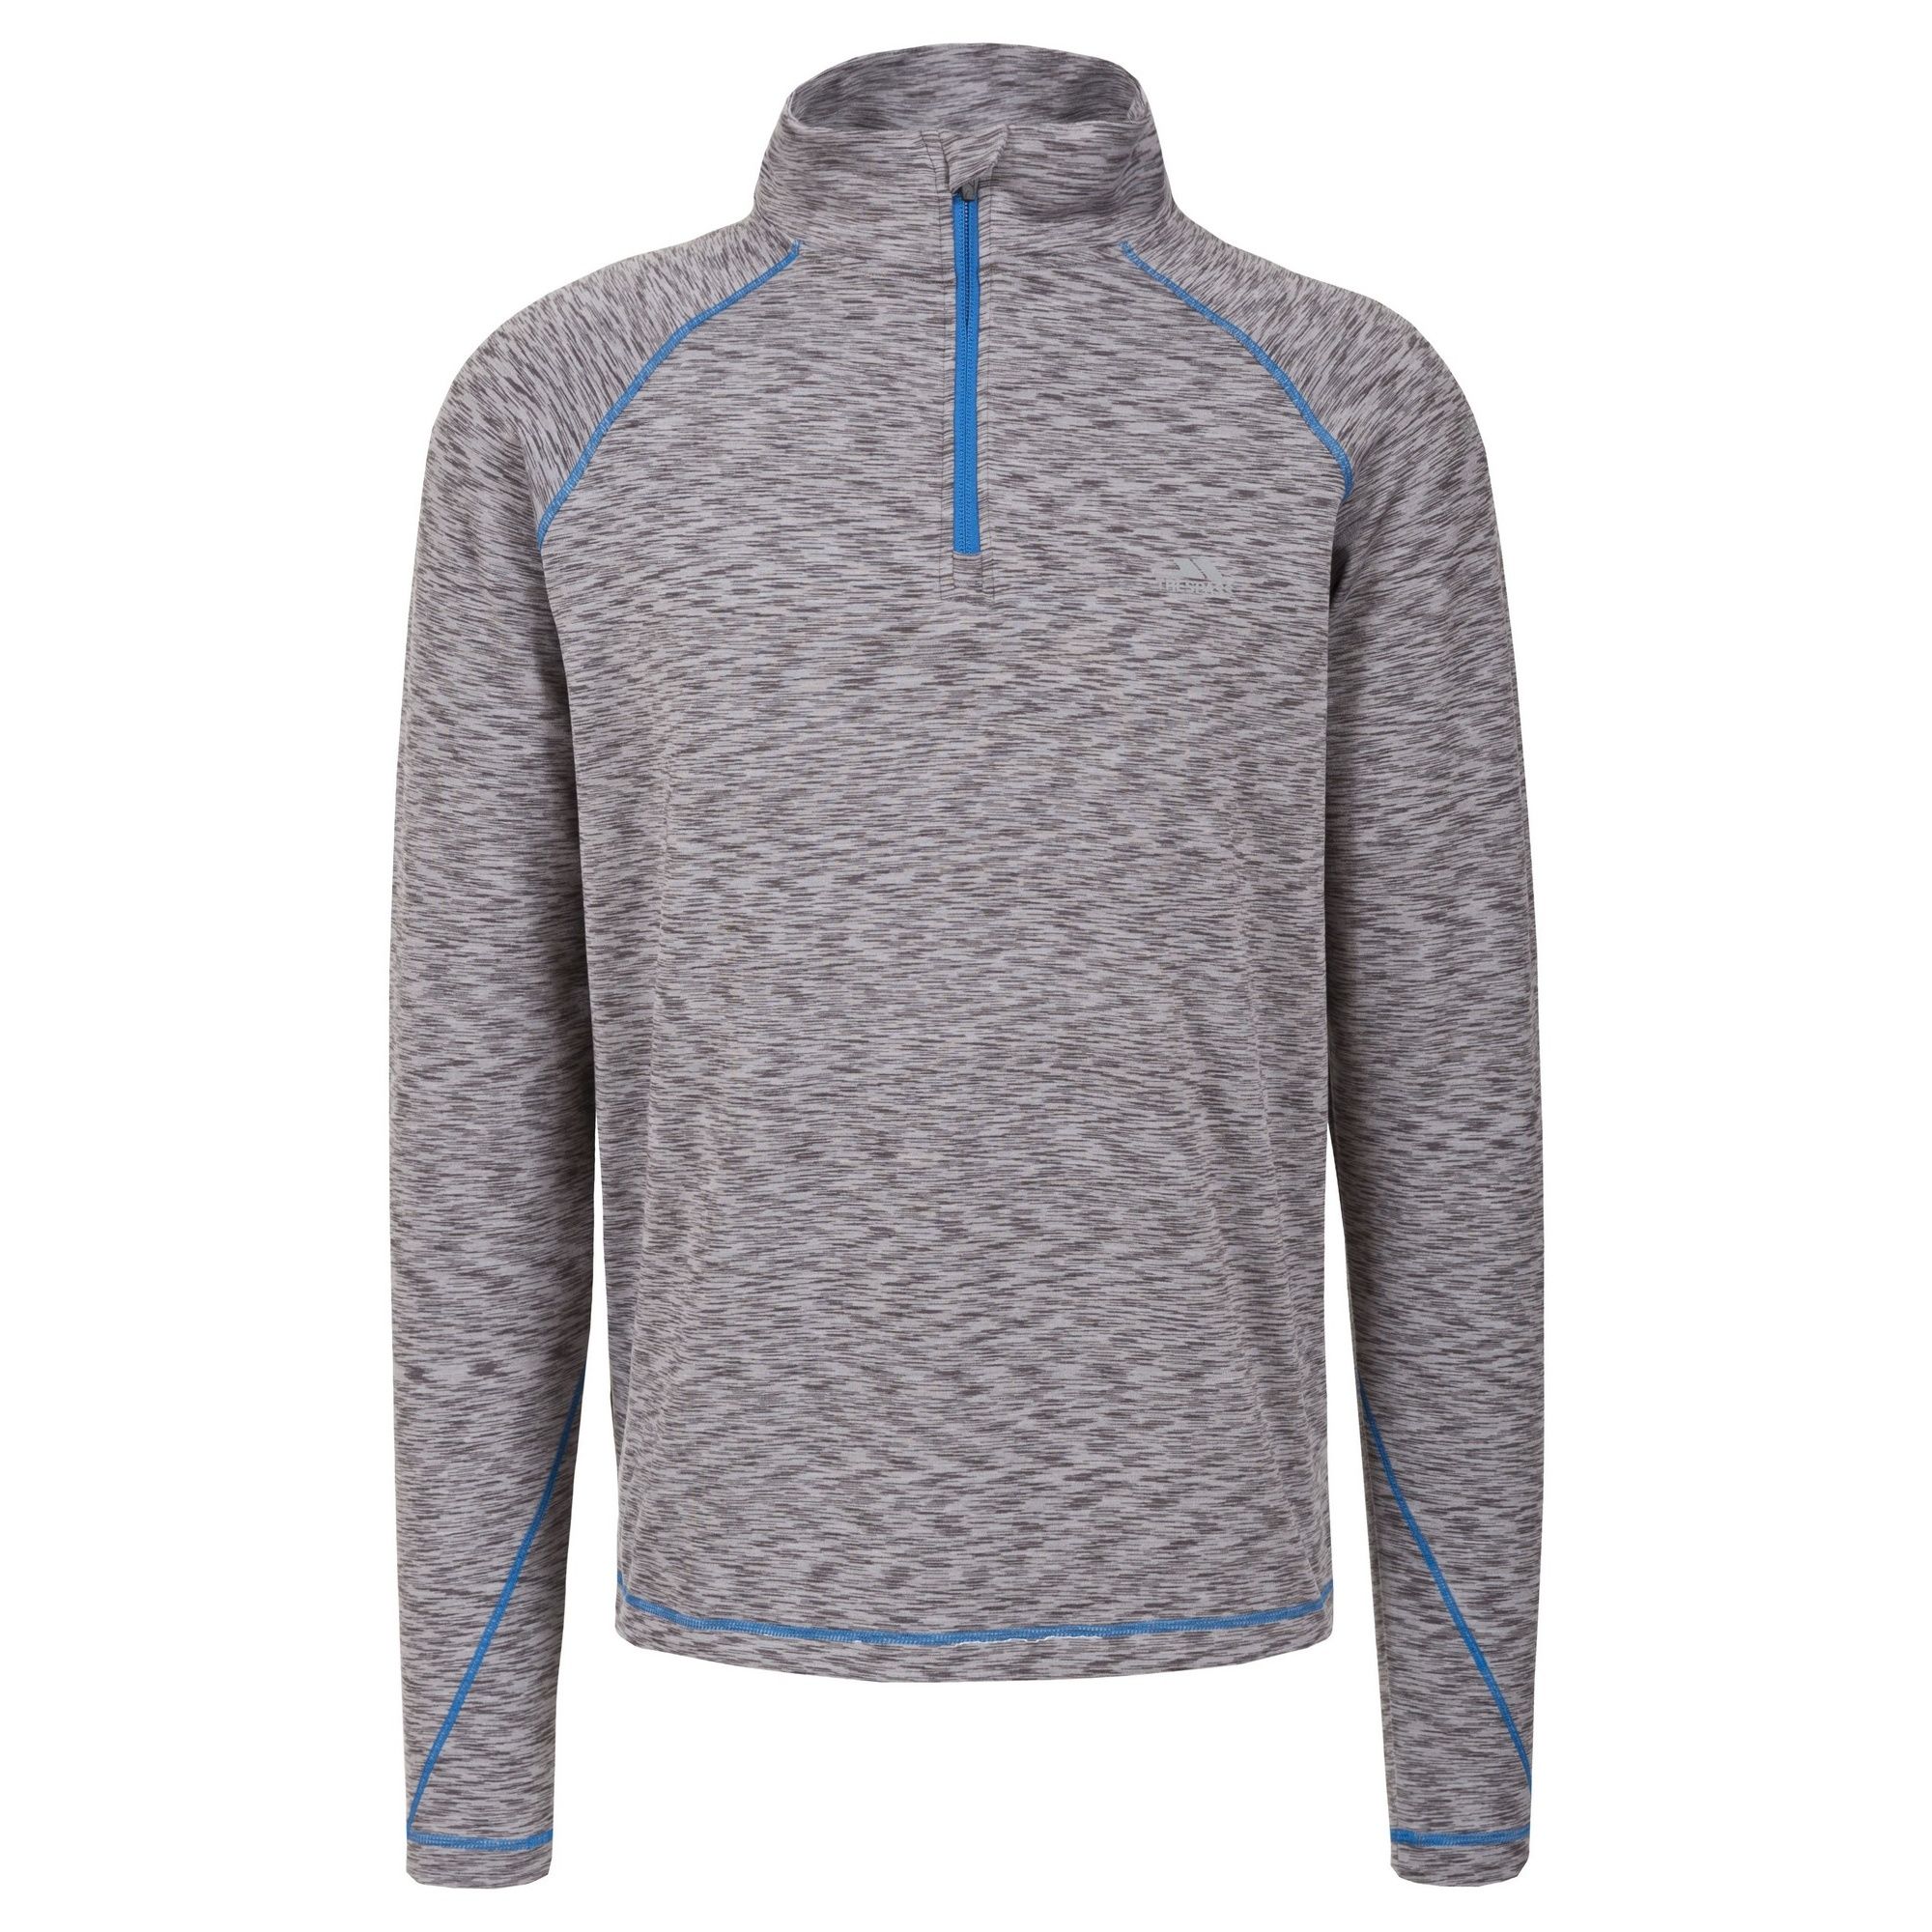 1/2 zip. Long sleeve. Contrast flat seams. Reflective printed logos. Small rear zip pocket.  finish. Wicking. Quick dry. 86% Polyester/14% Elastane. Trespass Mens Chest Sizing (approx): S - 35-37in/89-94cm, M - 38-40in/96.5-101.5cm, L - 41-43in/104-109cm, XL - 44-46in/111.5-117cm, XXL - 46-48in/117-122cm, 3XL - 48-50in/122-127cm.